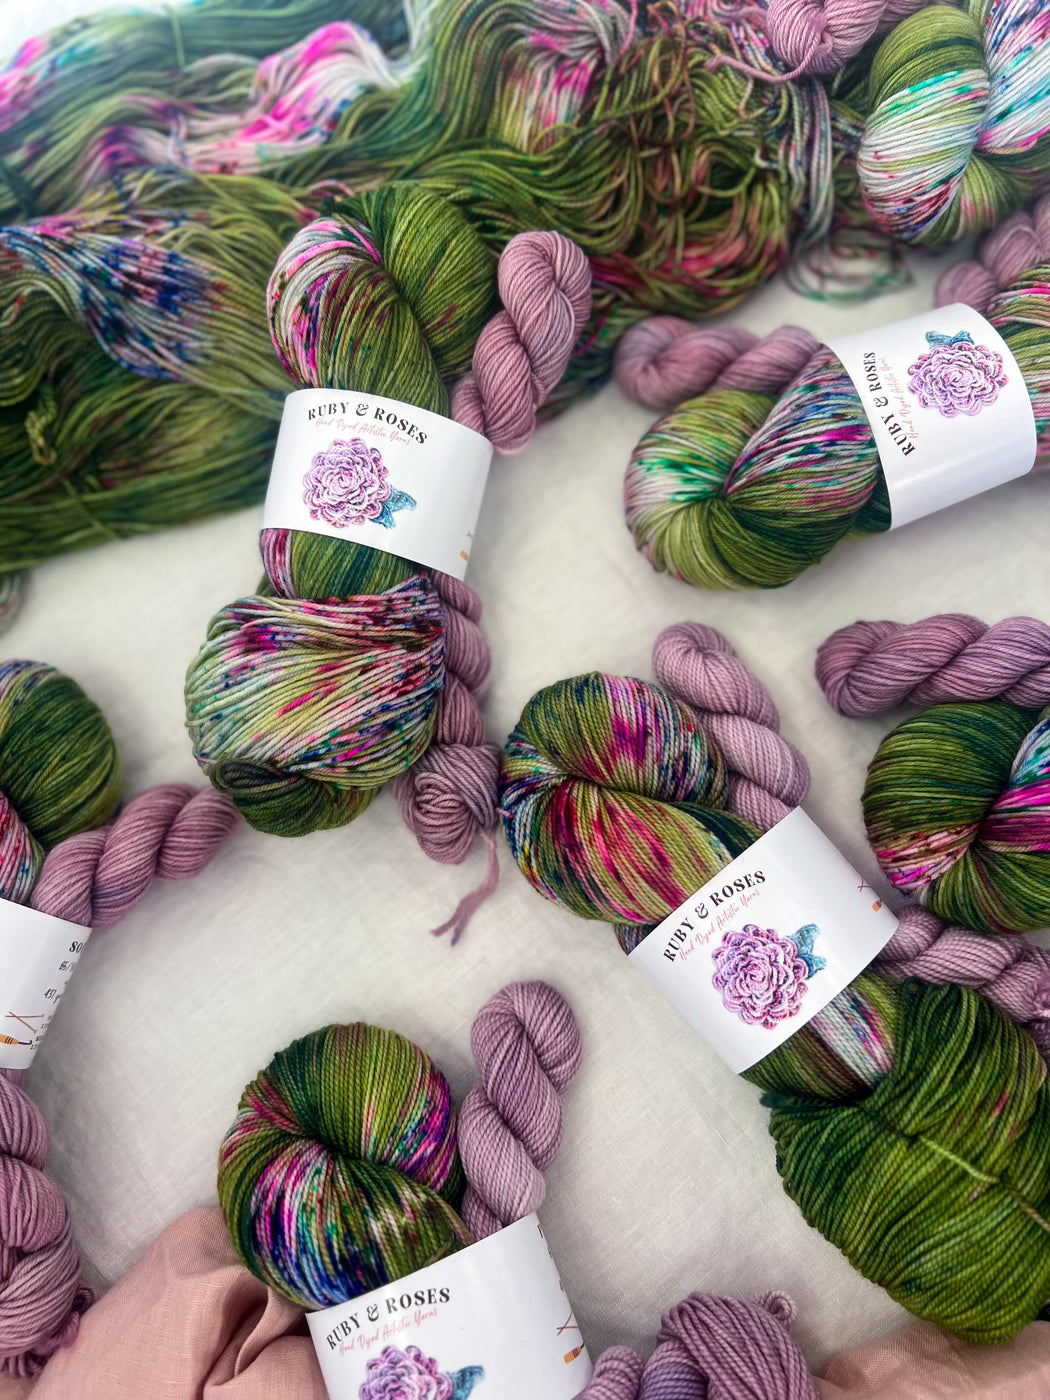 Whispering Pines /// Sock Set - Ruby and Roses Yarn - Hand Dyed Yarn